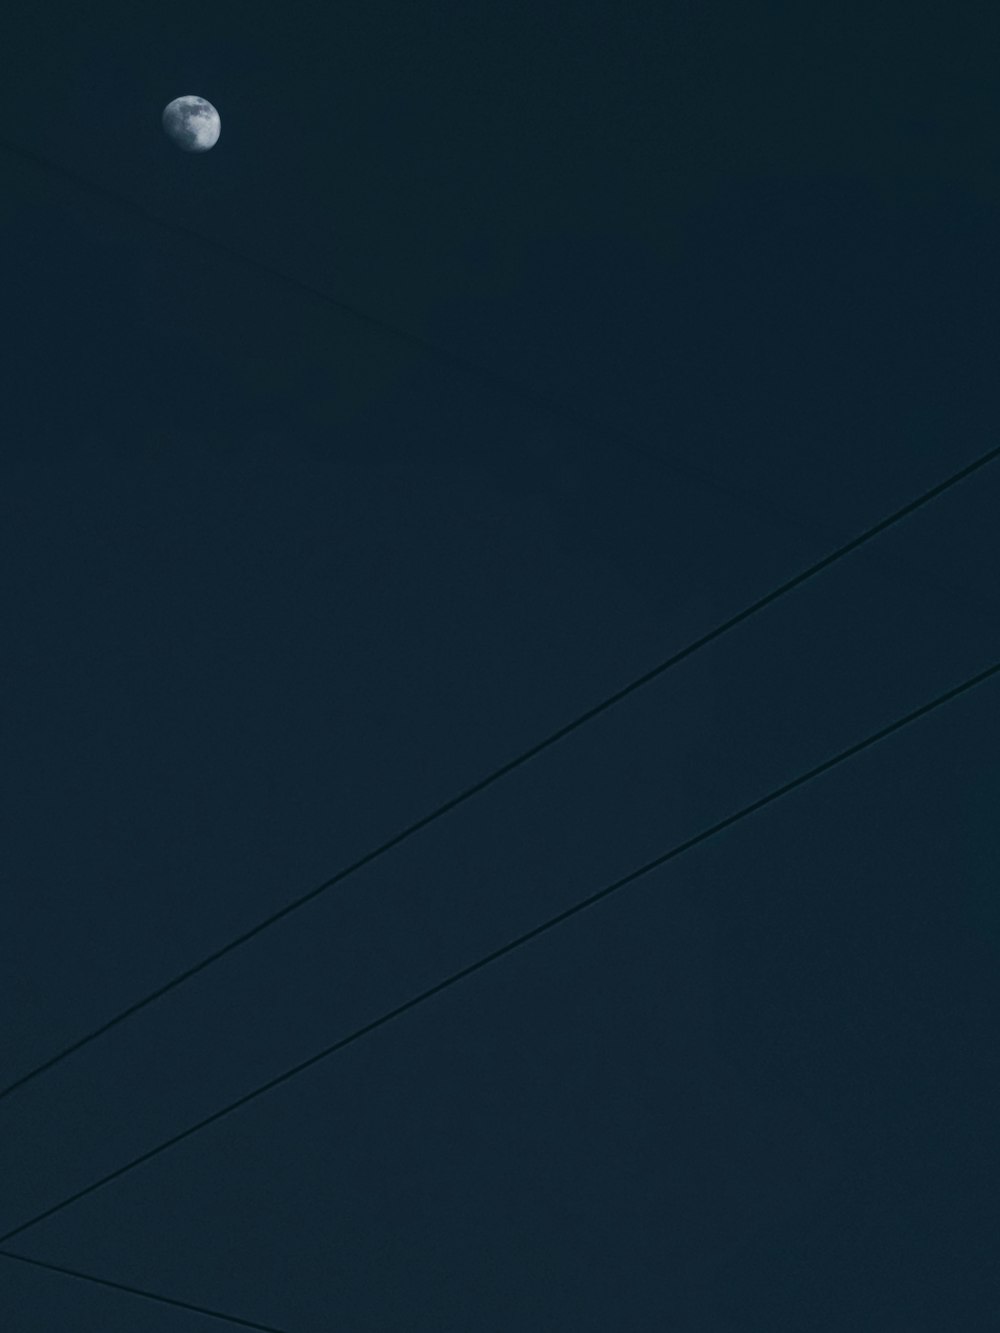 a full moon is seen in the sky above power lines